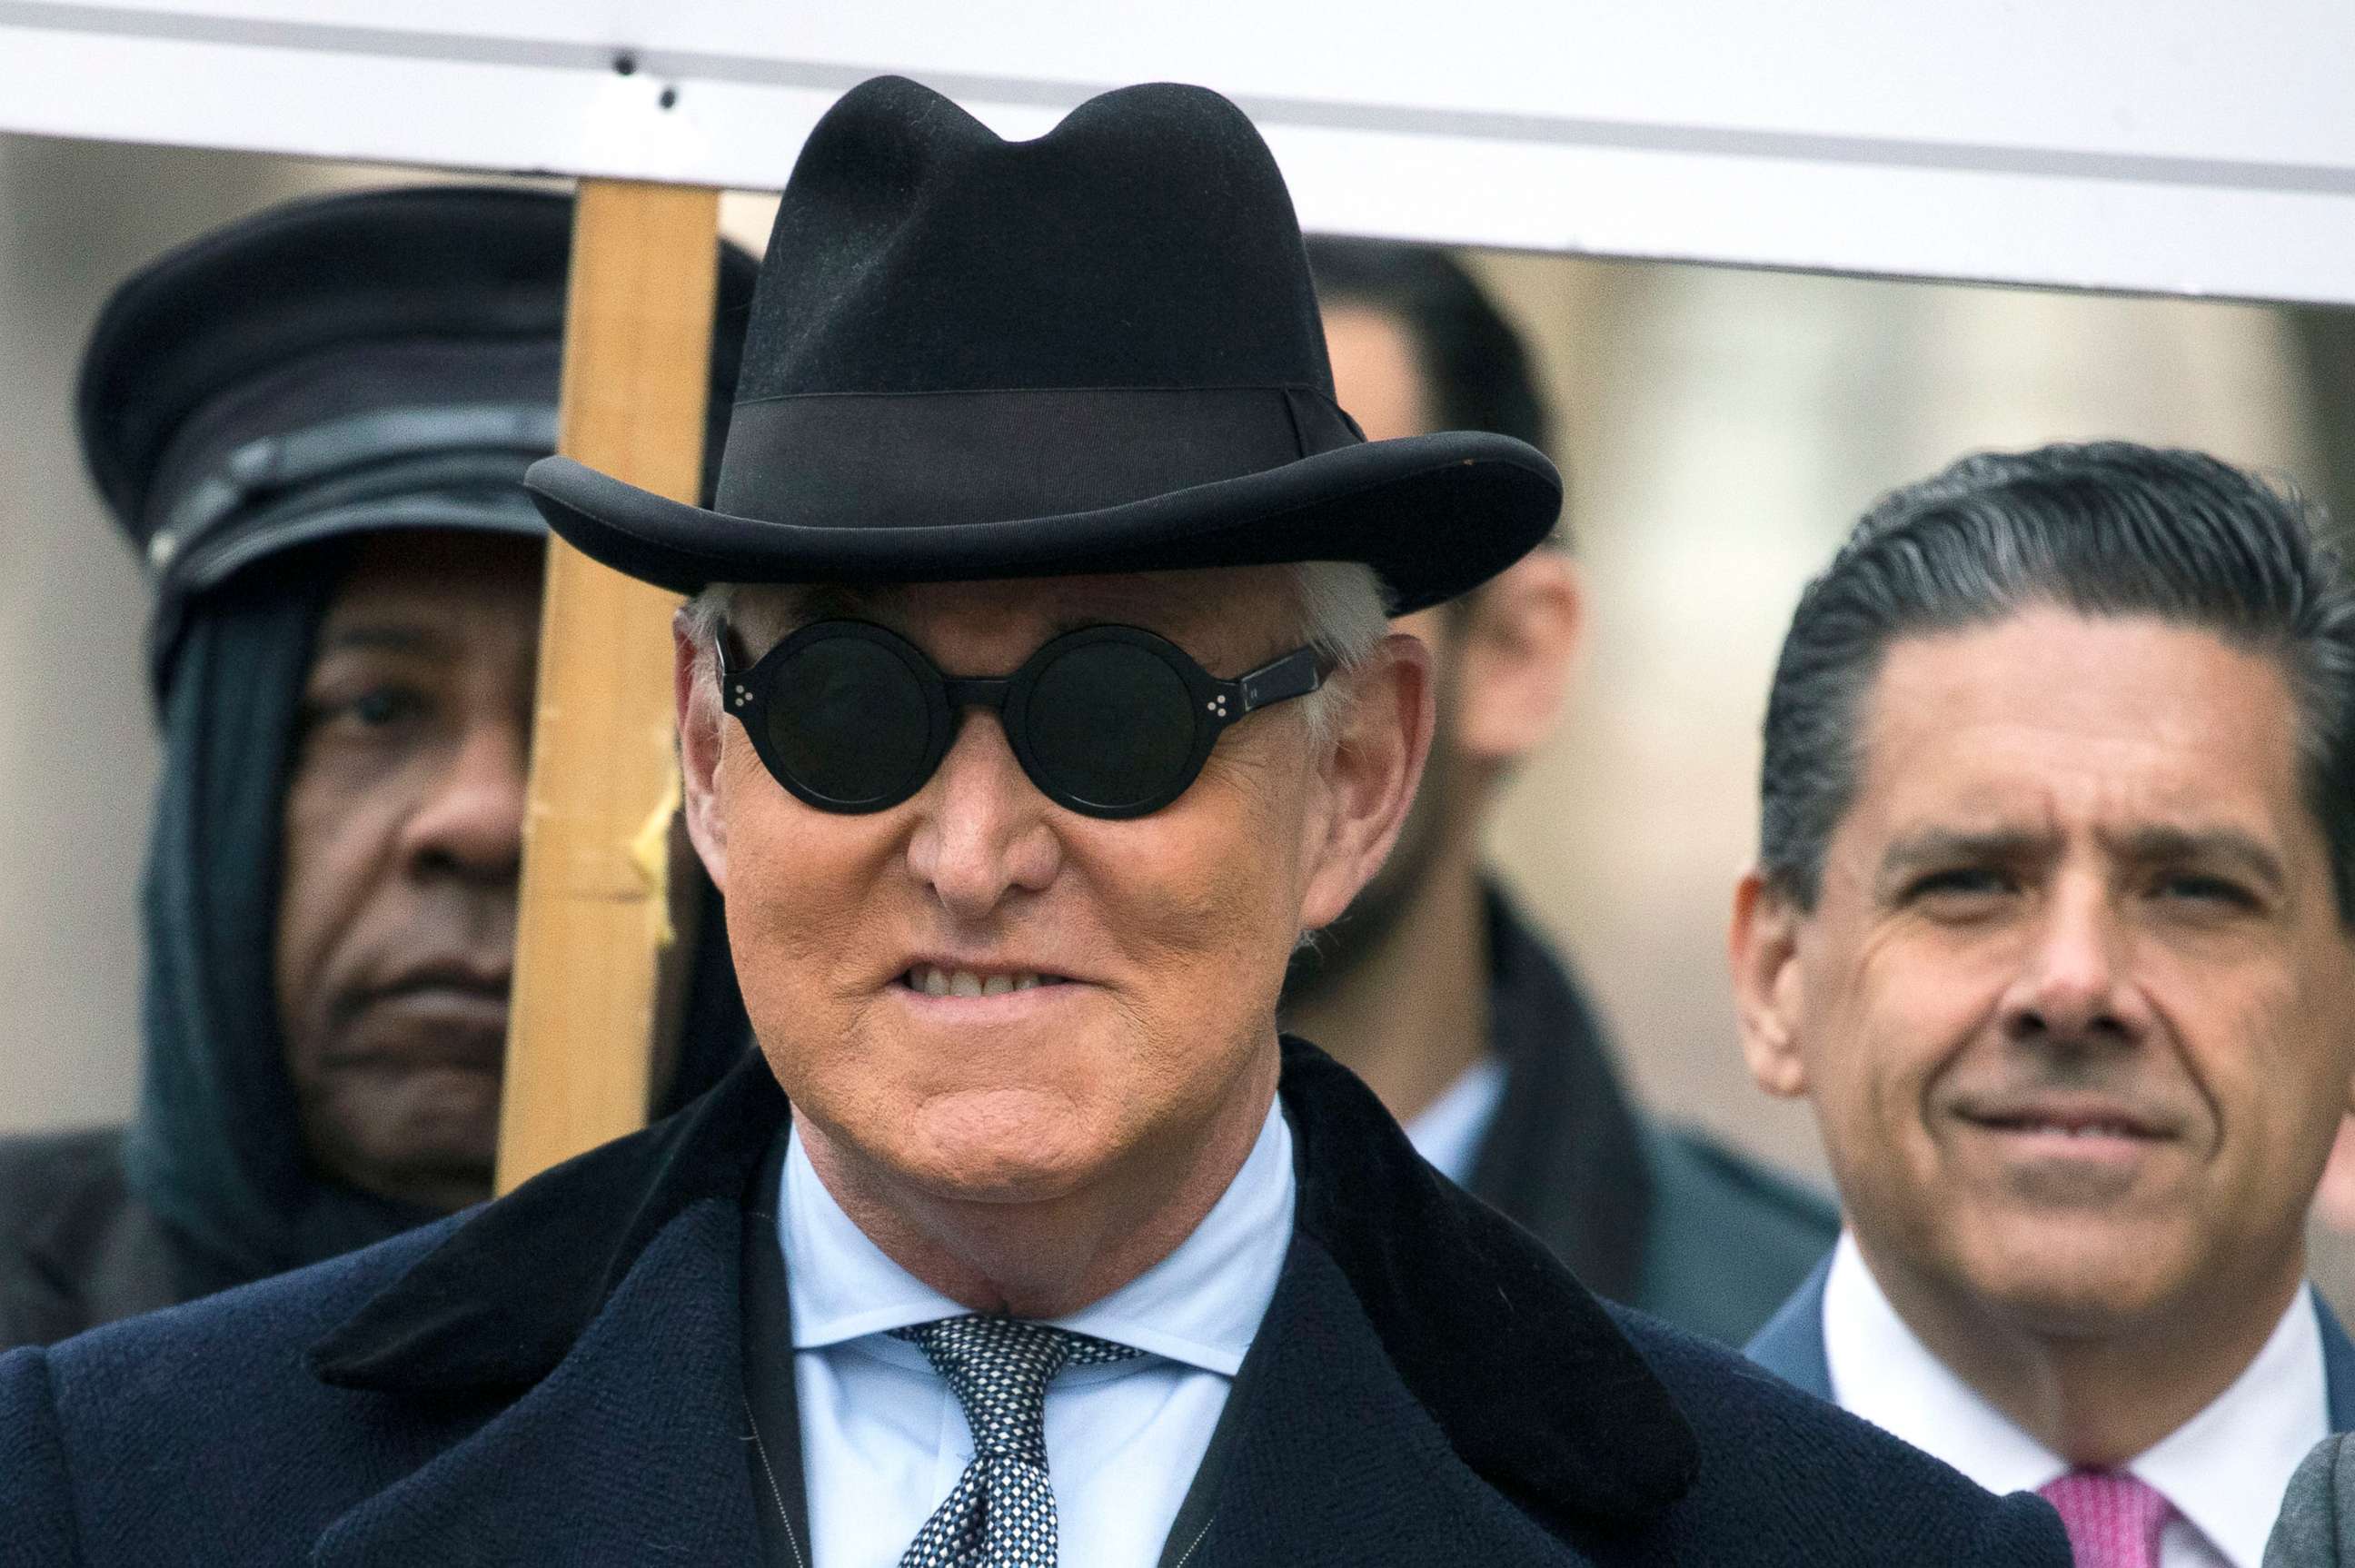 PHOTO: Roger Stone arrives at U.S. District Court in Washington, D.C., Feb. 20, 2020.